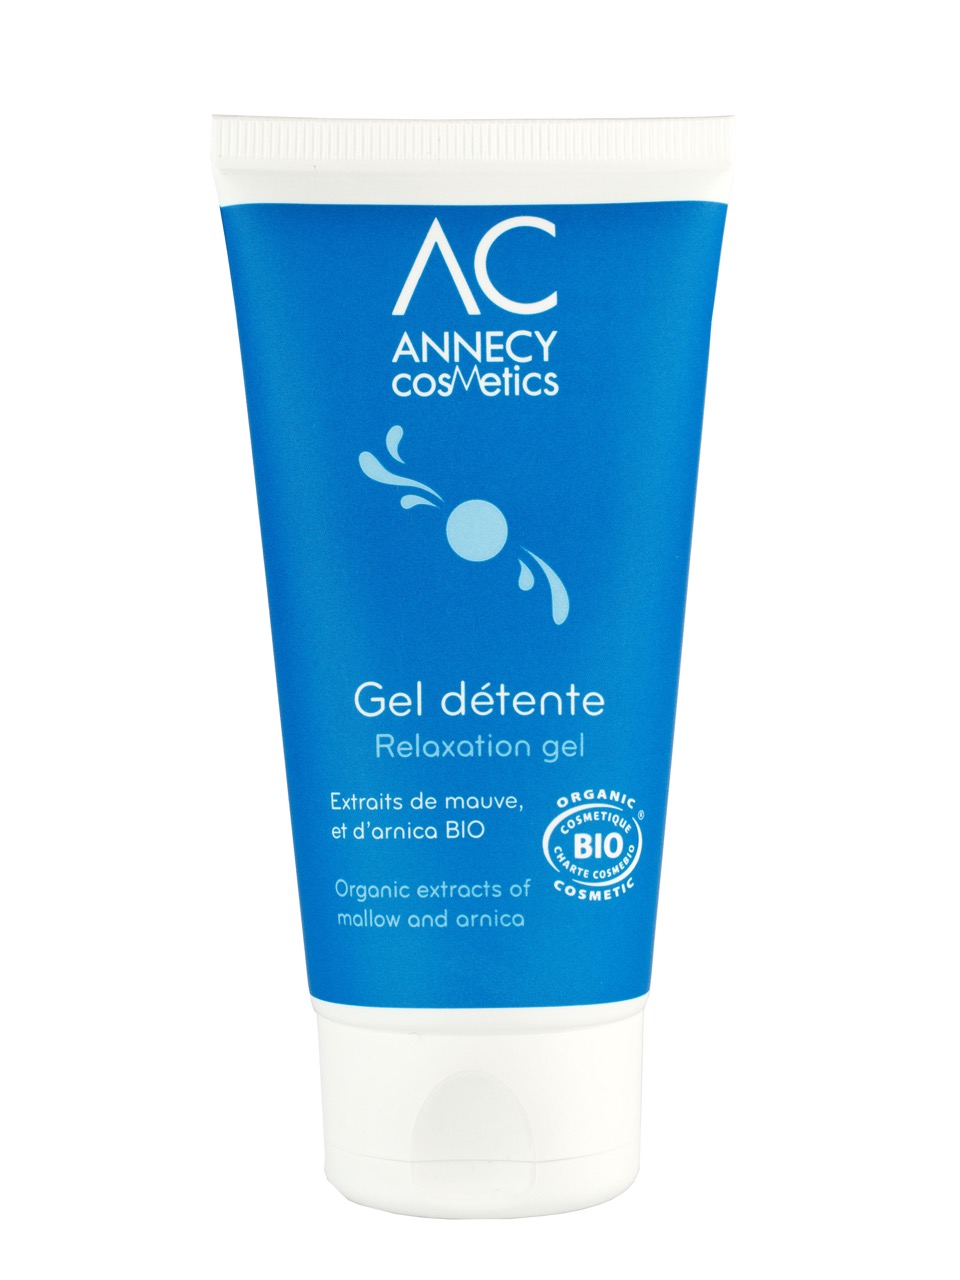 Doux Good - Annecy Cosmetics - Gel détente musculaire